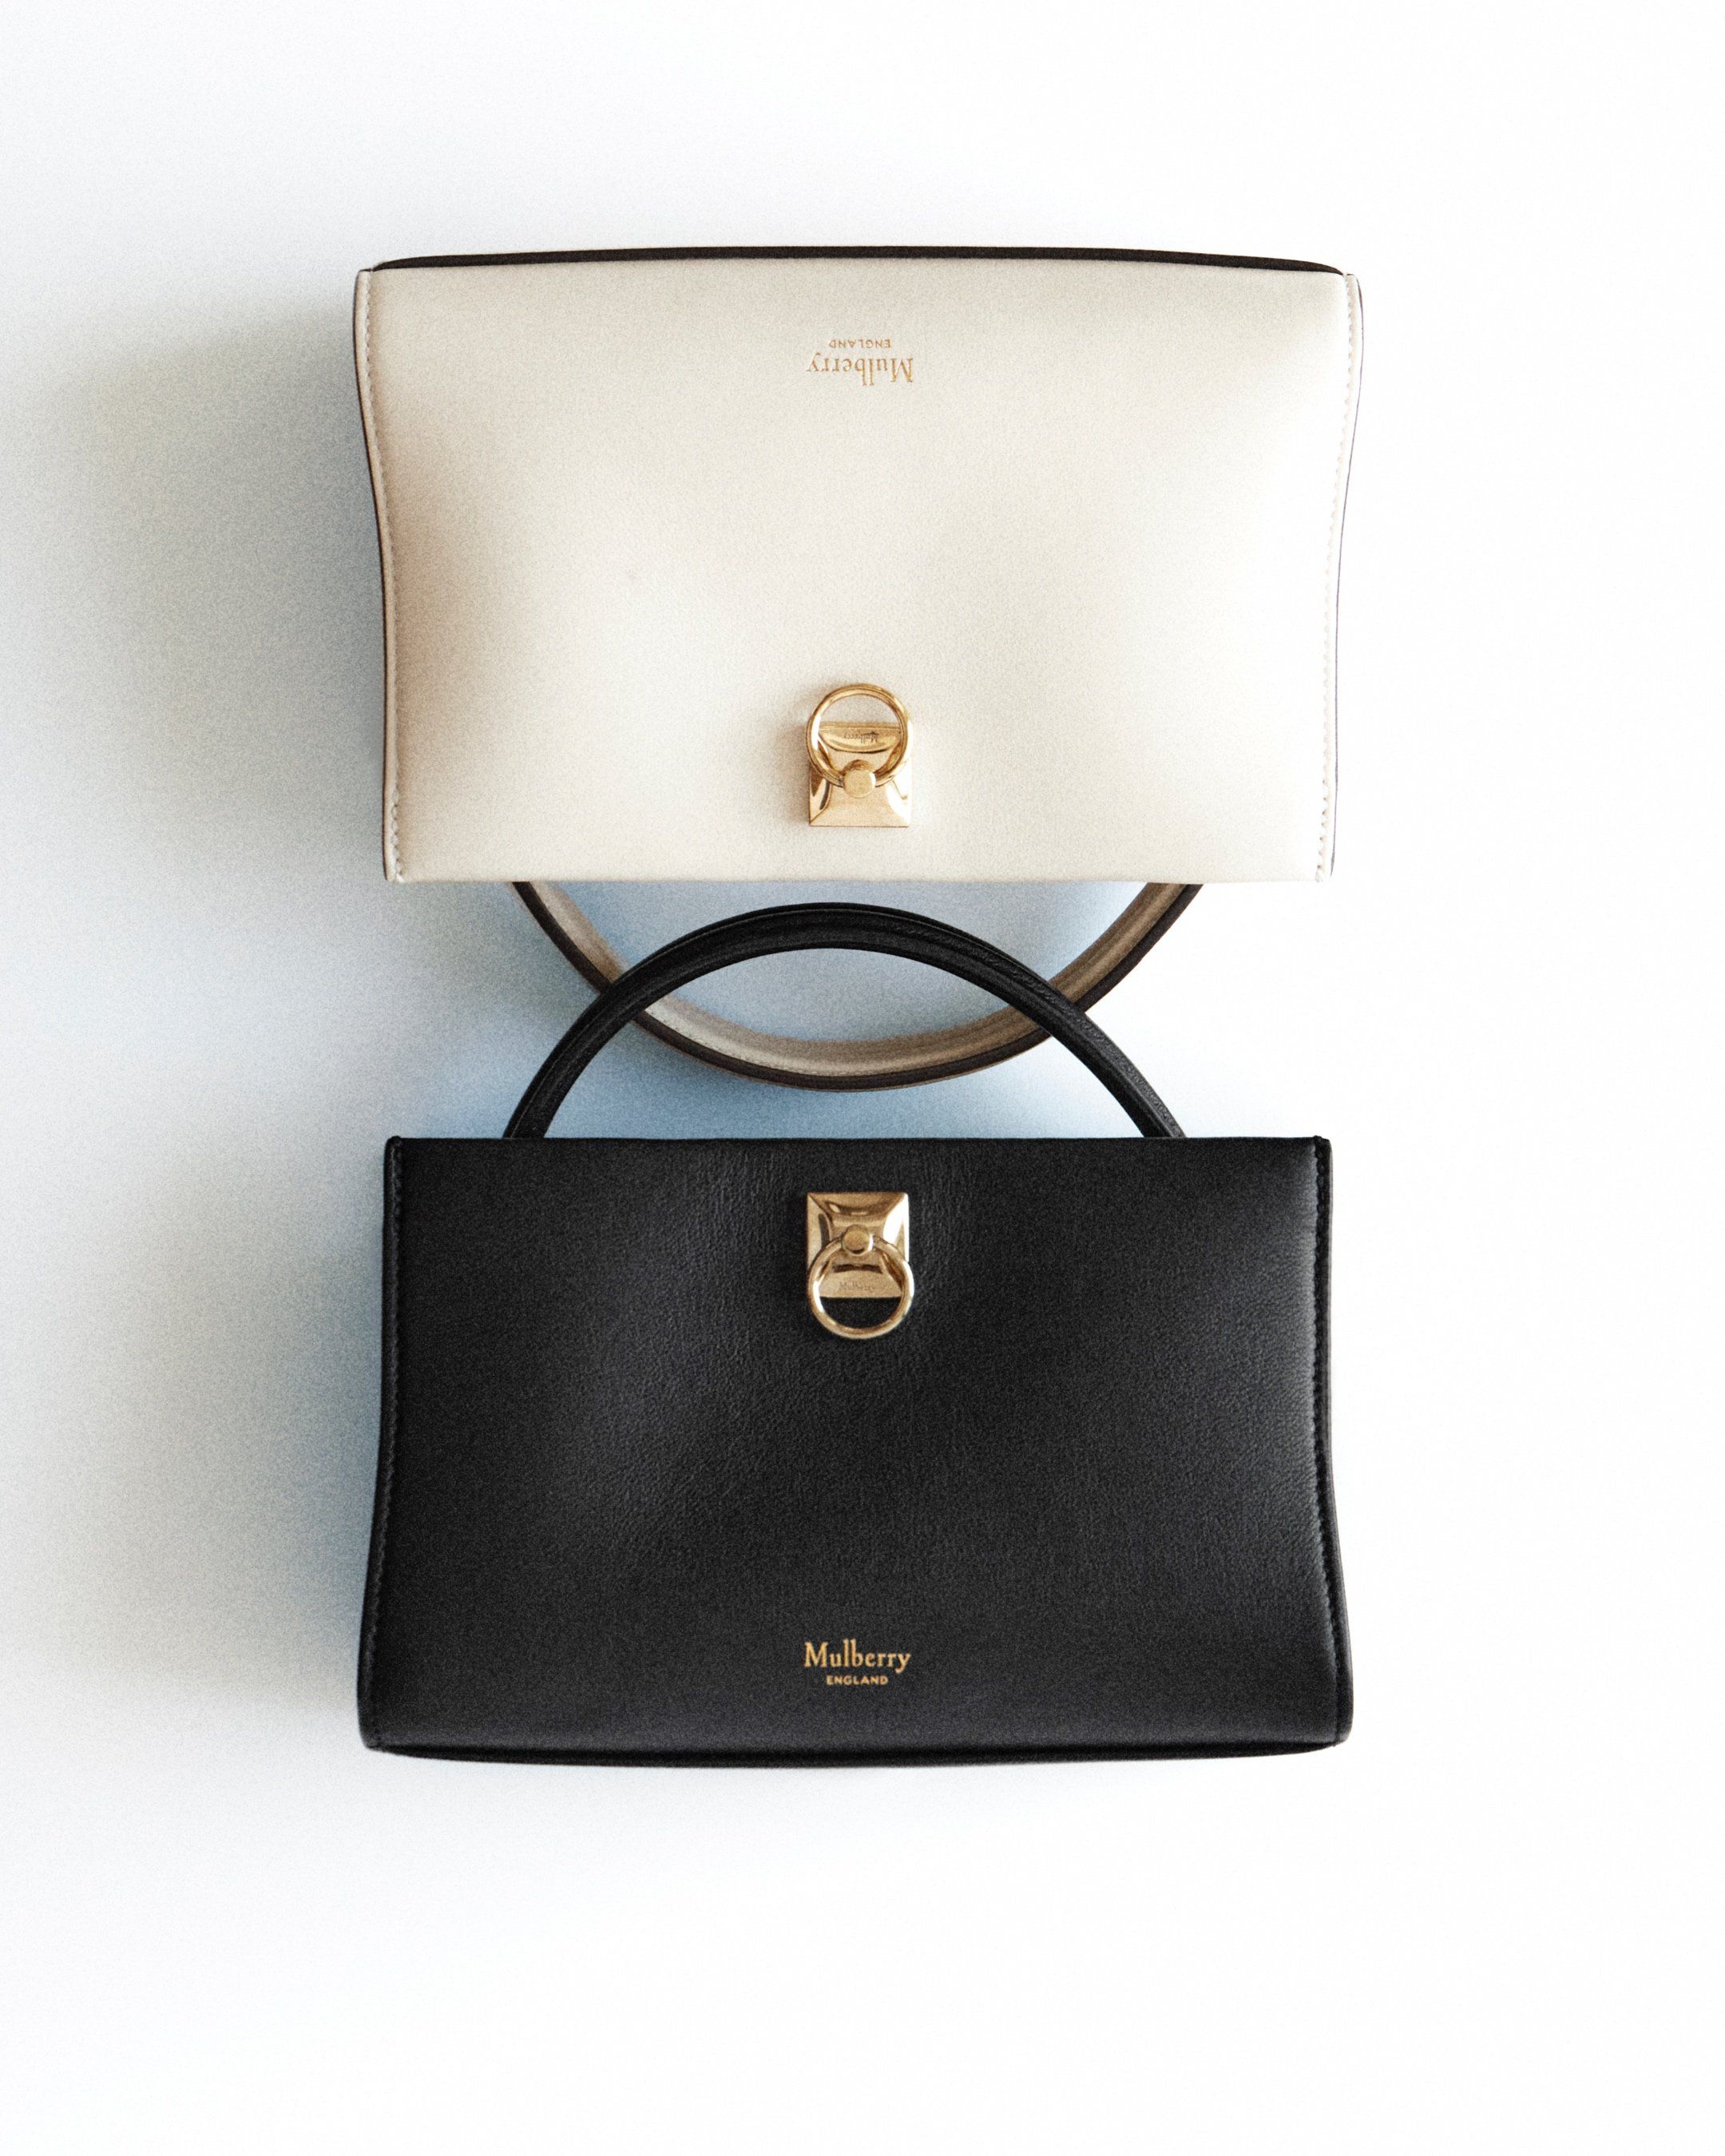 Two Mulberry Mini Iris bags in black and white leather